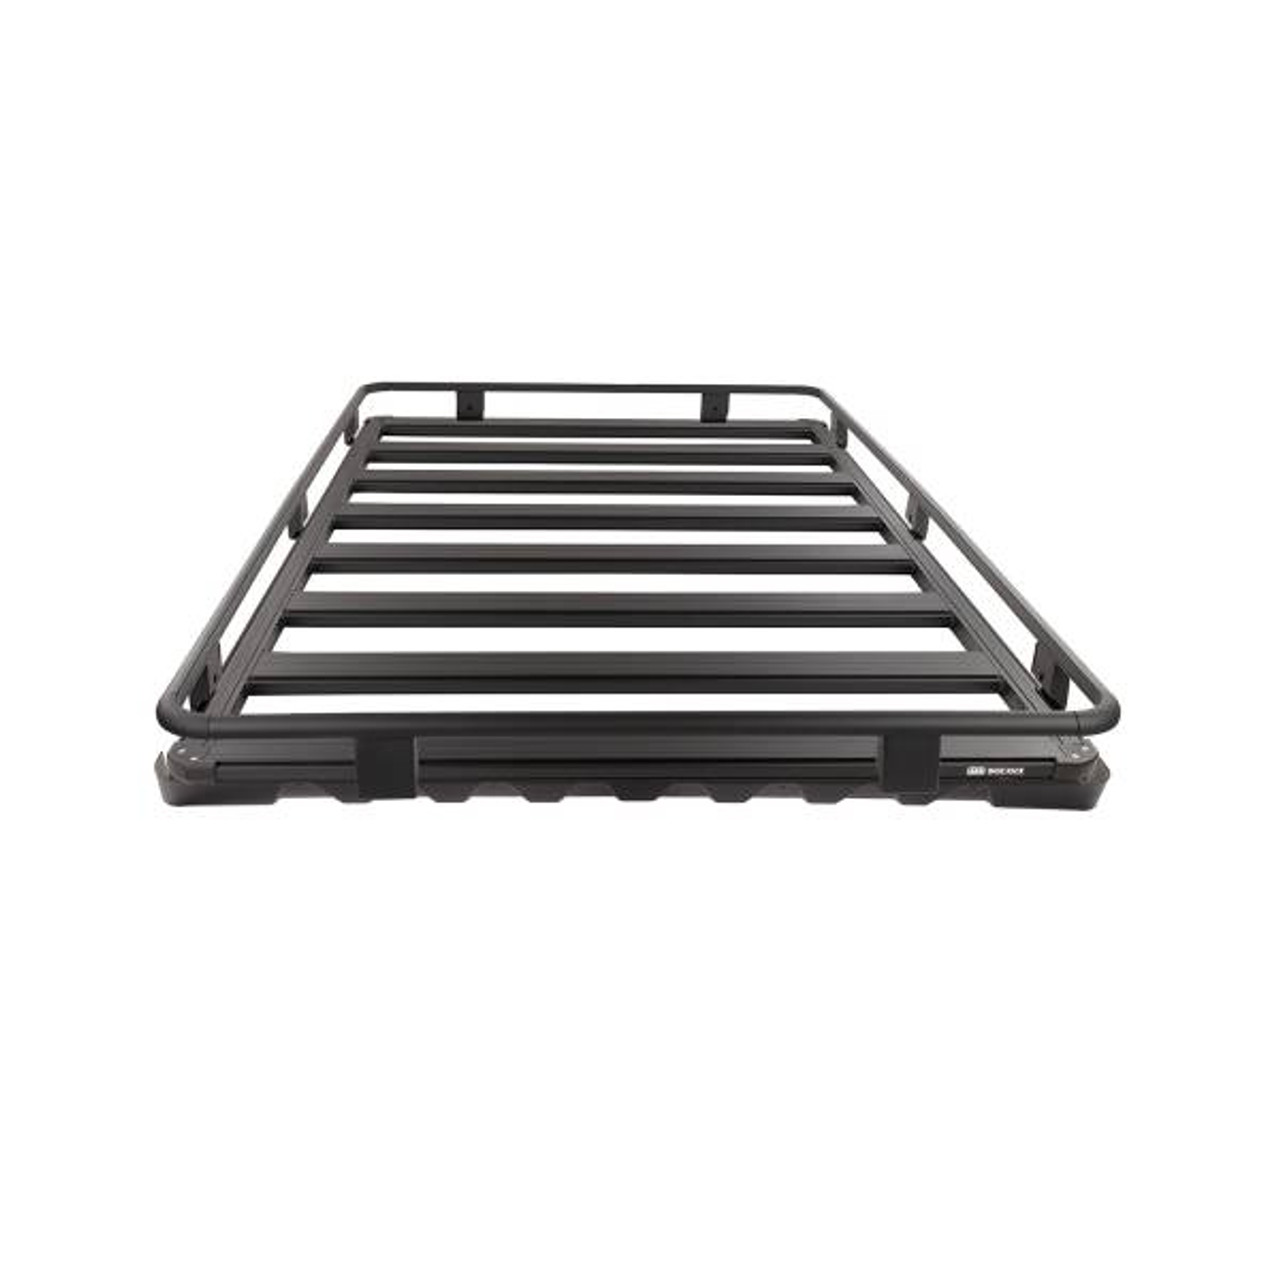 ARB Base Rack 84in x 51in with Mount Kit/Deflector/Full Cage Guard Rail - BASE274